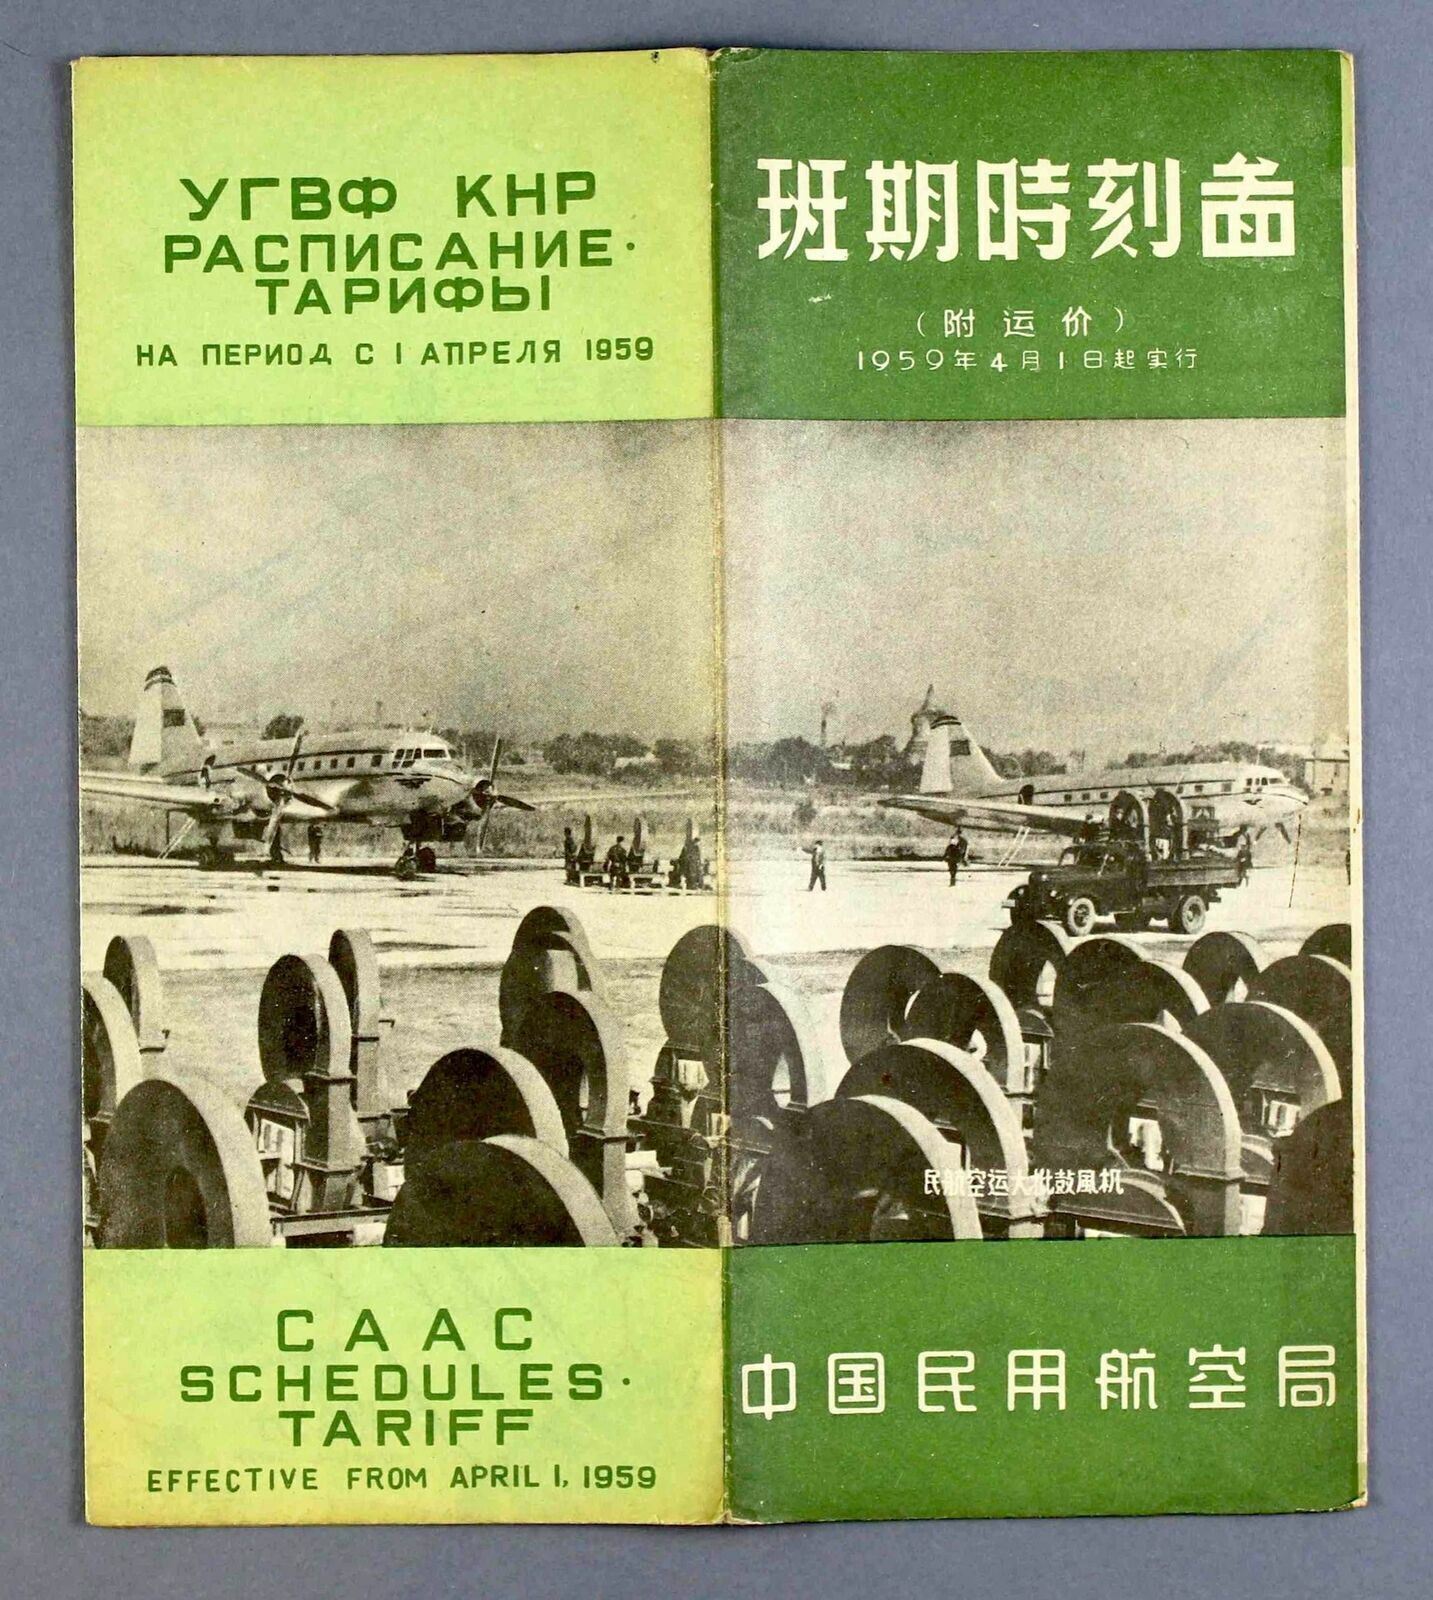 CAAC AIRLNE TIMETABLE APRIL 1959 CIVIL AVIATION ADMINISTRATION OF CHINA